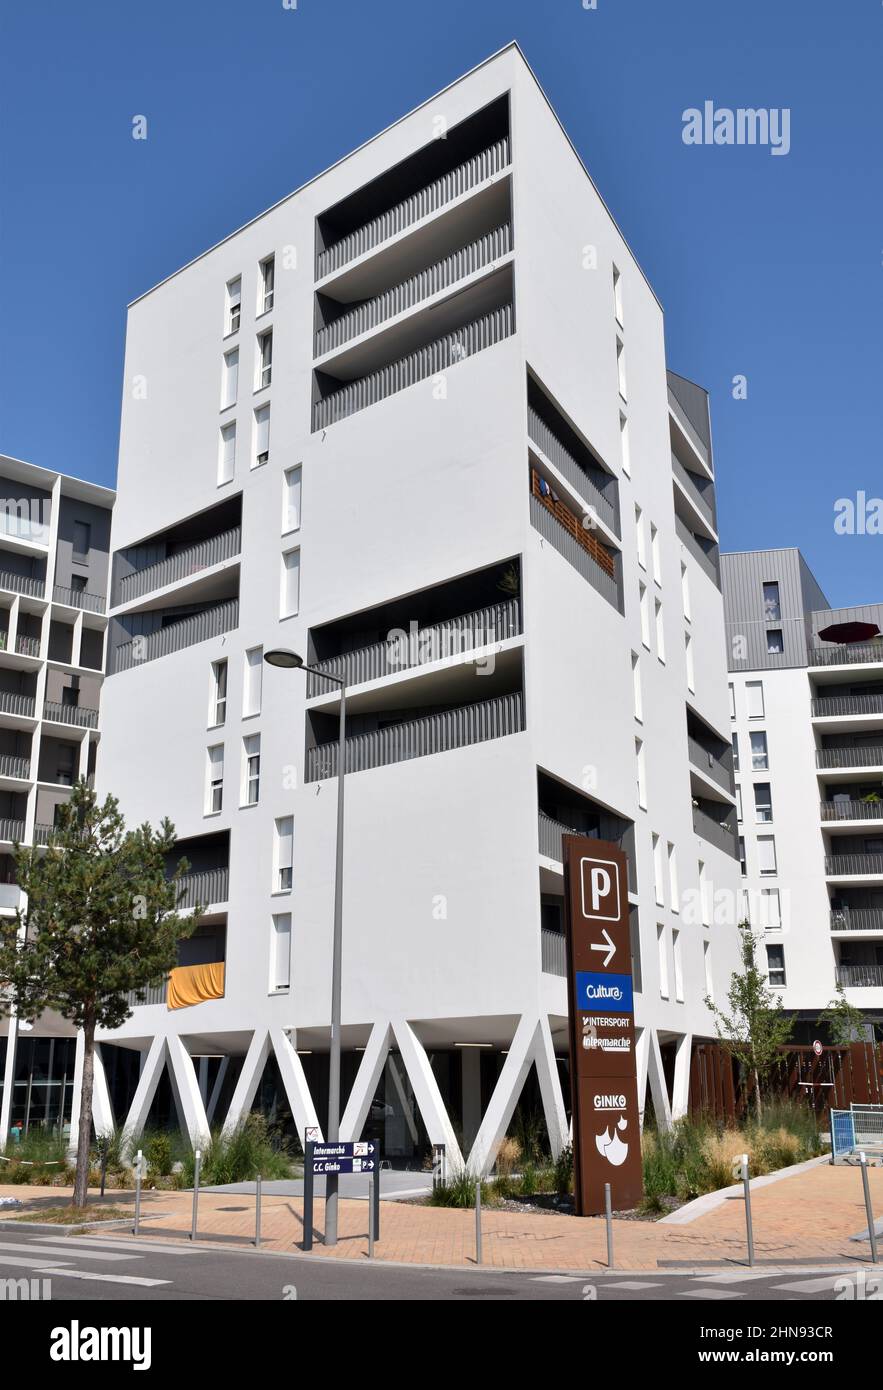 A six storey apartment building, clad in white ceramic tiles, white shutters and some set backs and projecting balconies creating a Mediterranean feel Stock Photo